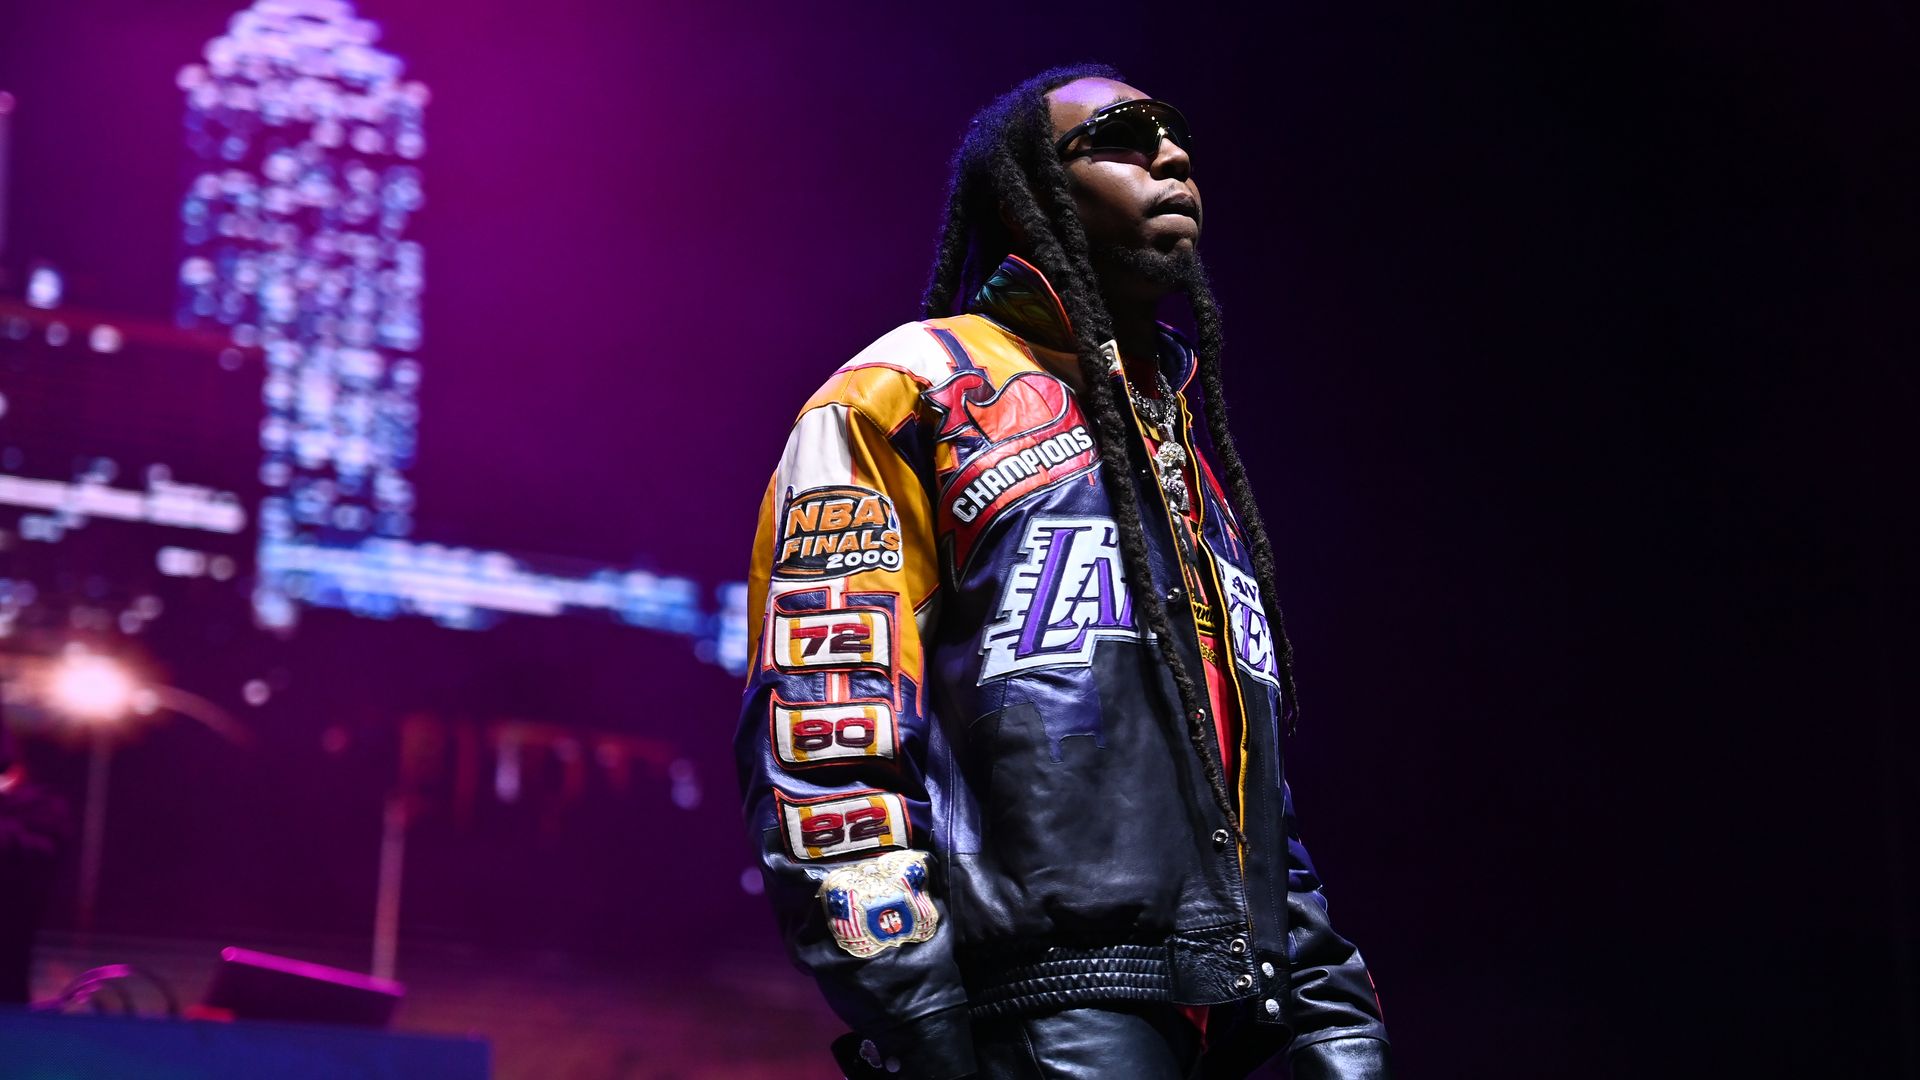 Takeoff of Migos: Remembering the rapper in photos